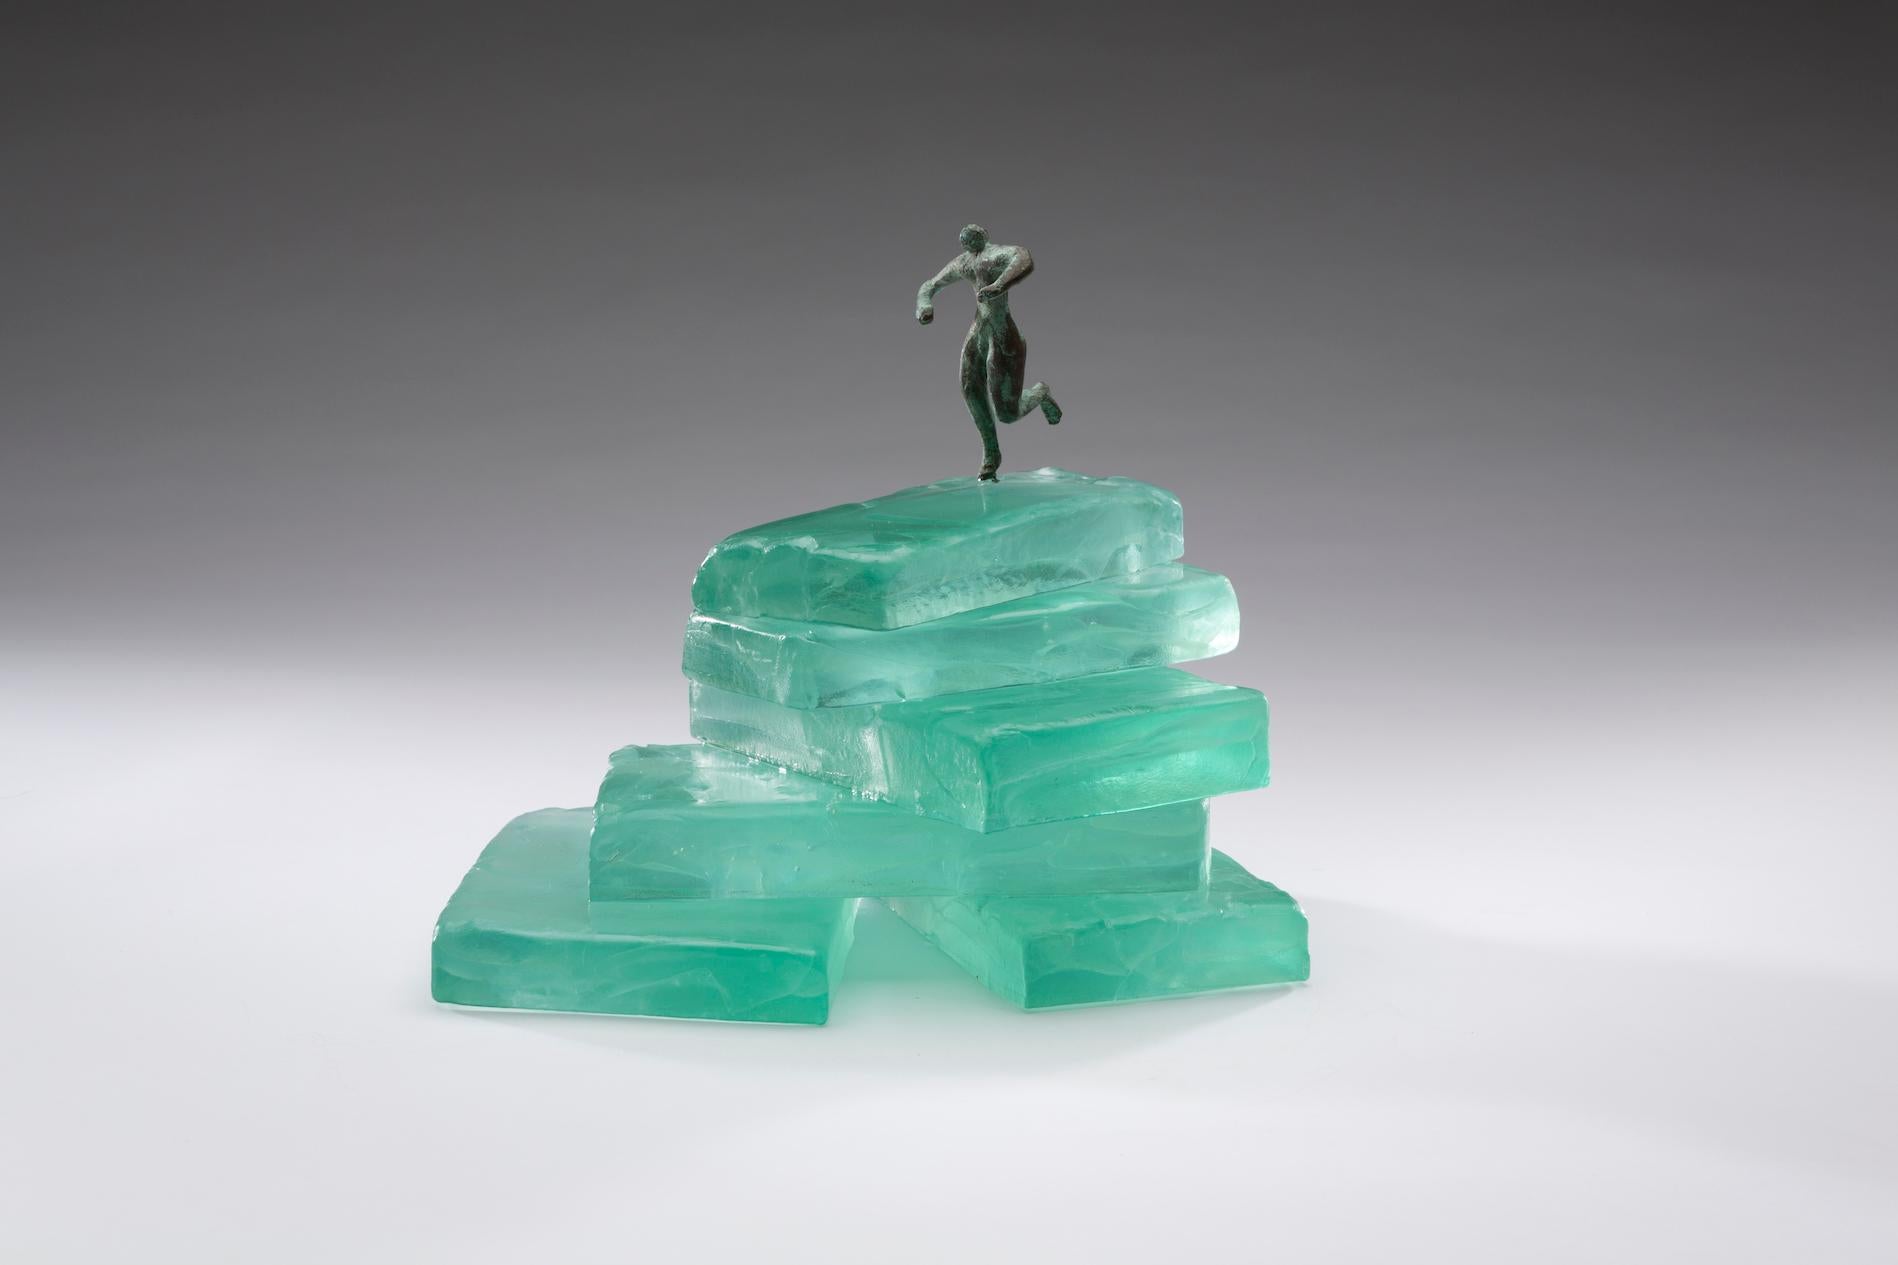 Worth the Climb was created using casted glass and lost wax bronze.  The glass and metal were cold worked and bronze figures are patinated.  Worth the Climb is two pieces. The glass on the smaller second piece with figure has been cold worked